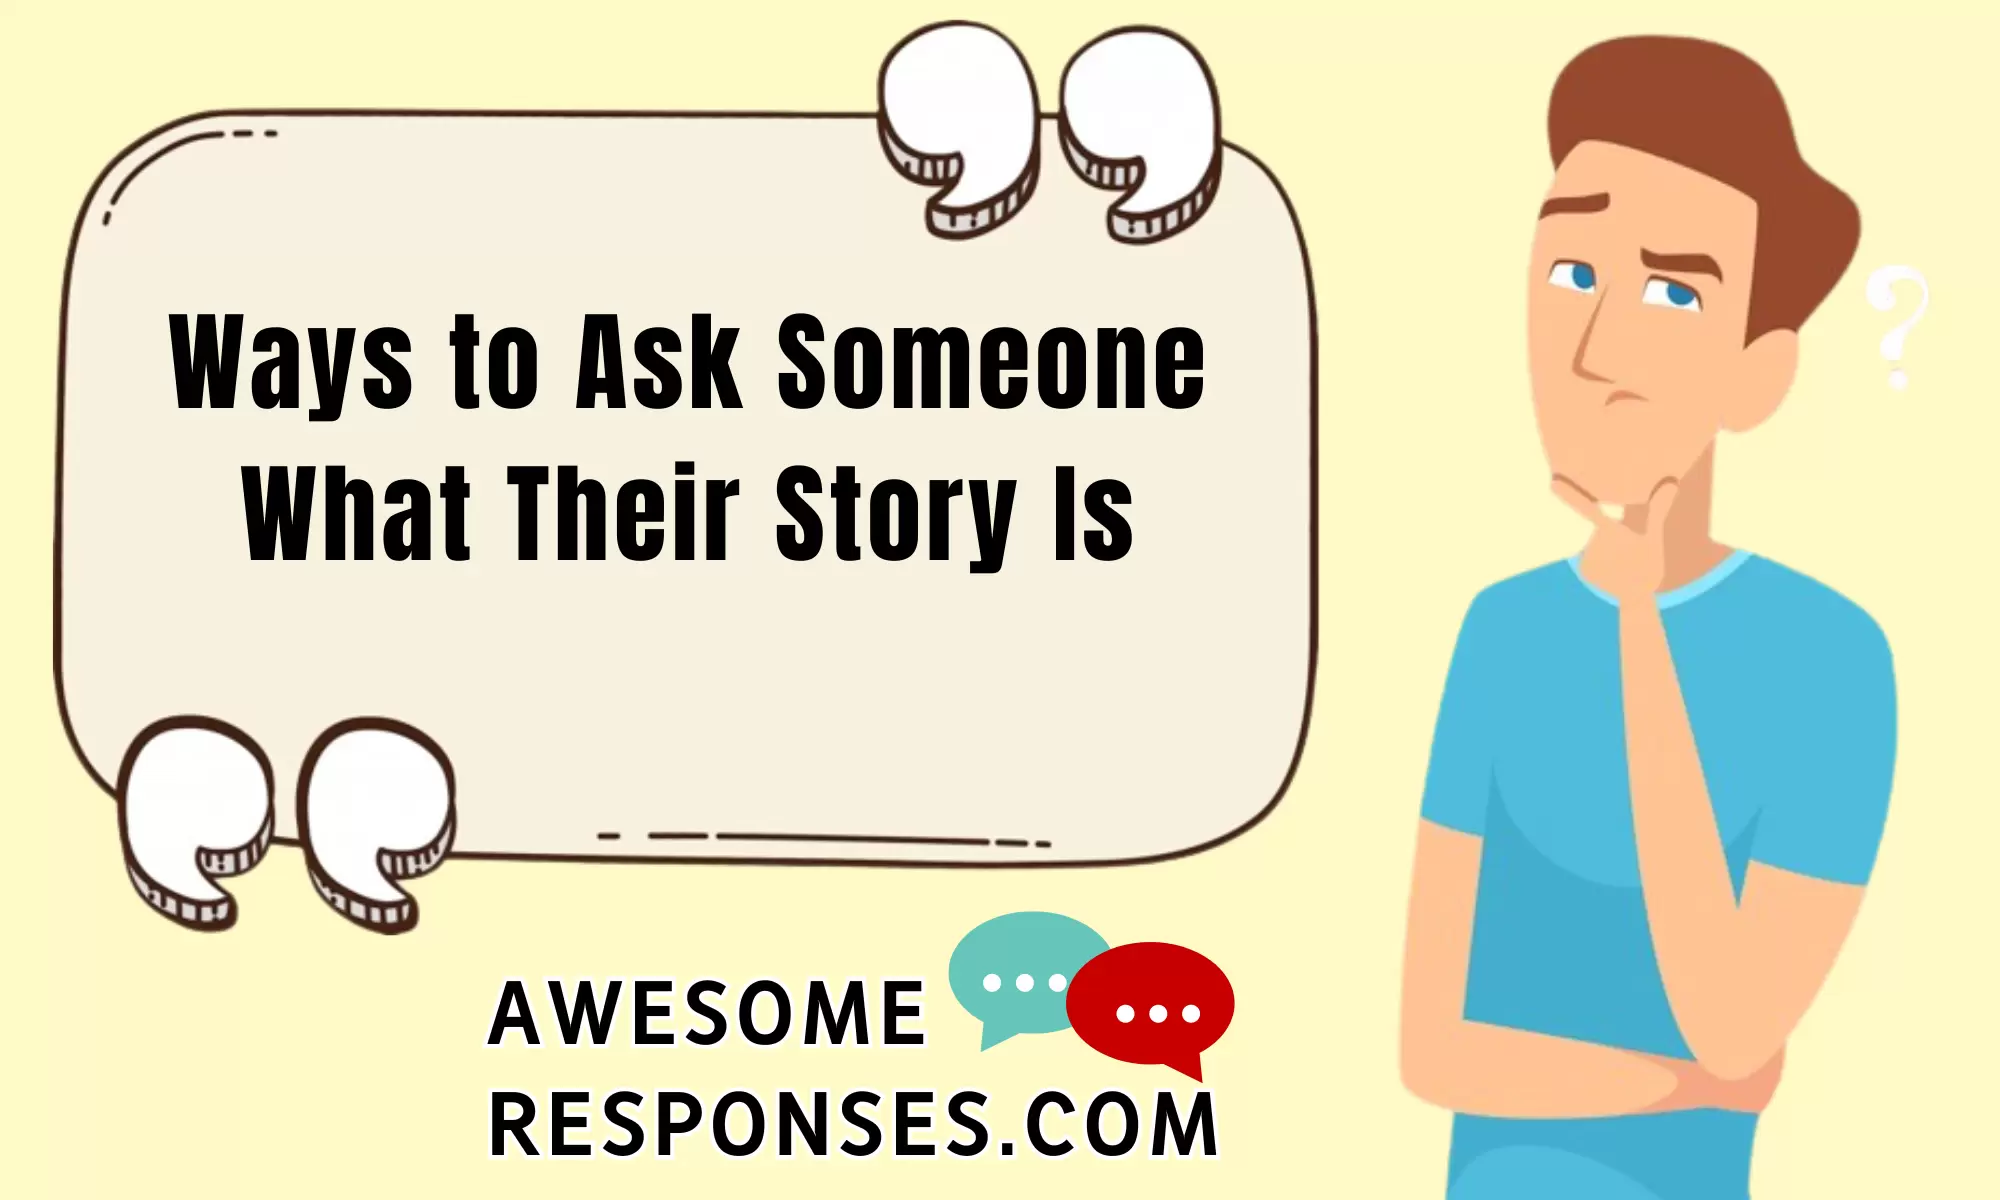 Ways to Ask Someone What Their Story Is